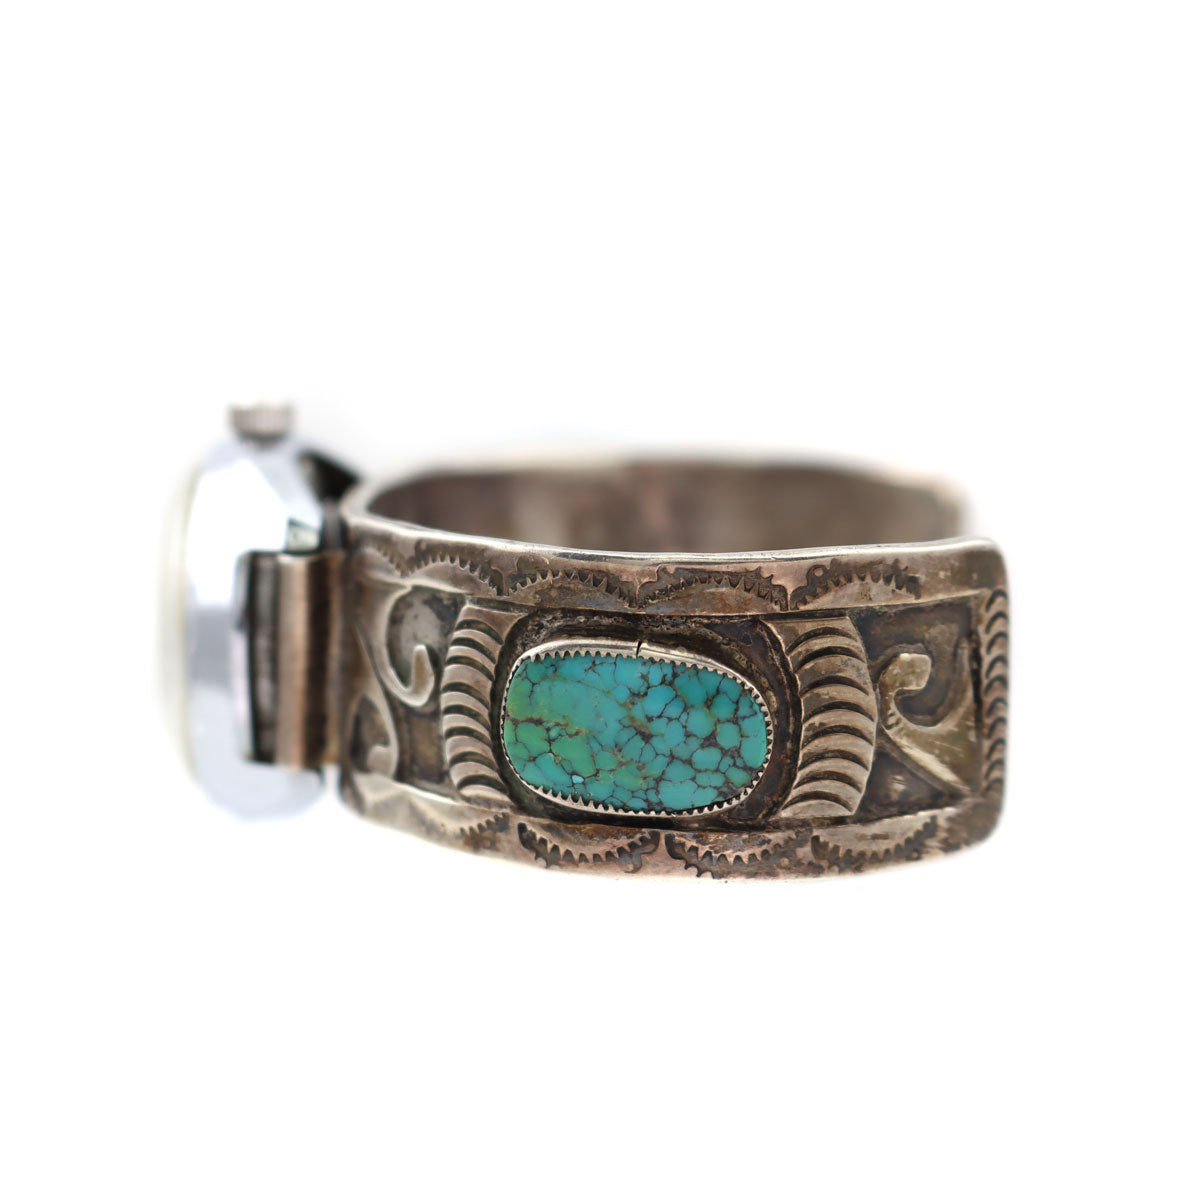 Navajo Turquoise and Silver Watch Bracelet c. 1950s, size 6.75 (J14409-CO-005)2